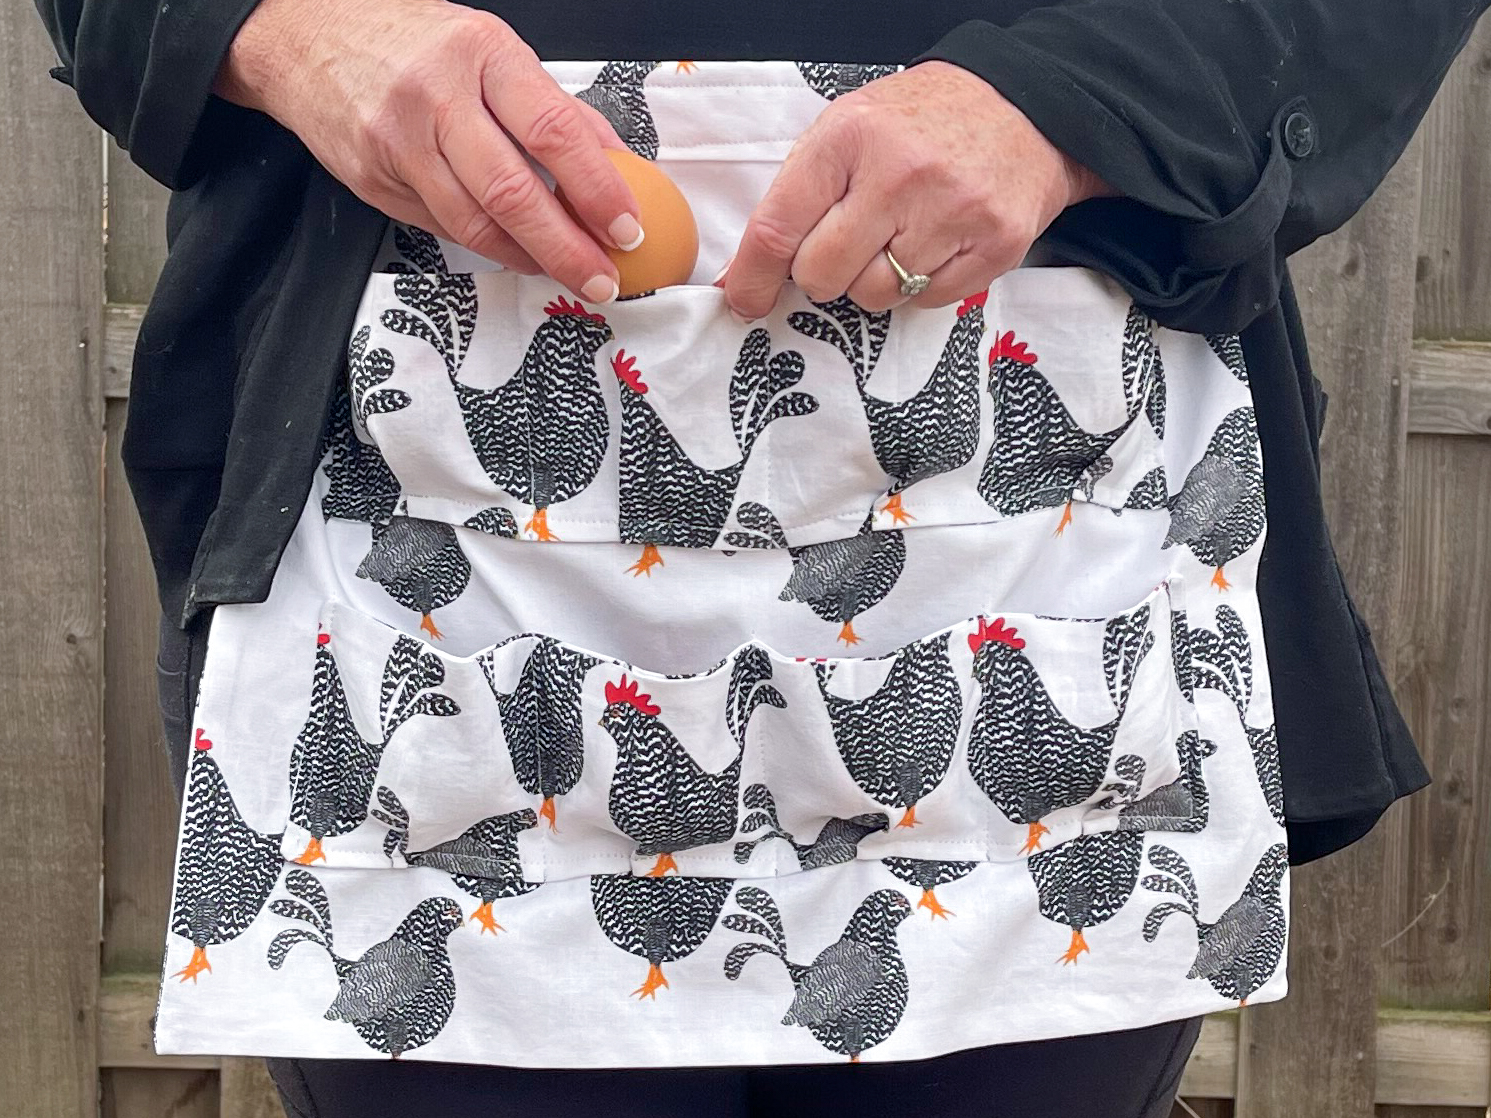 Egg Apron for Fresh Eggs,Egg Collecting Apron with 14 Deep Pockets,Chicken